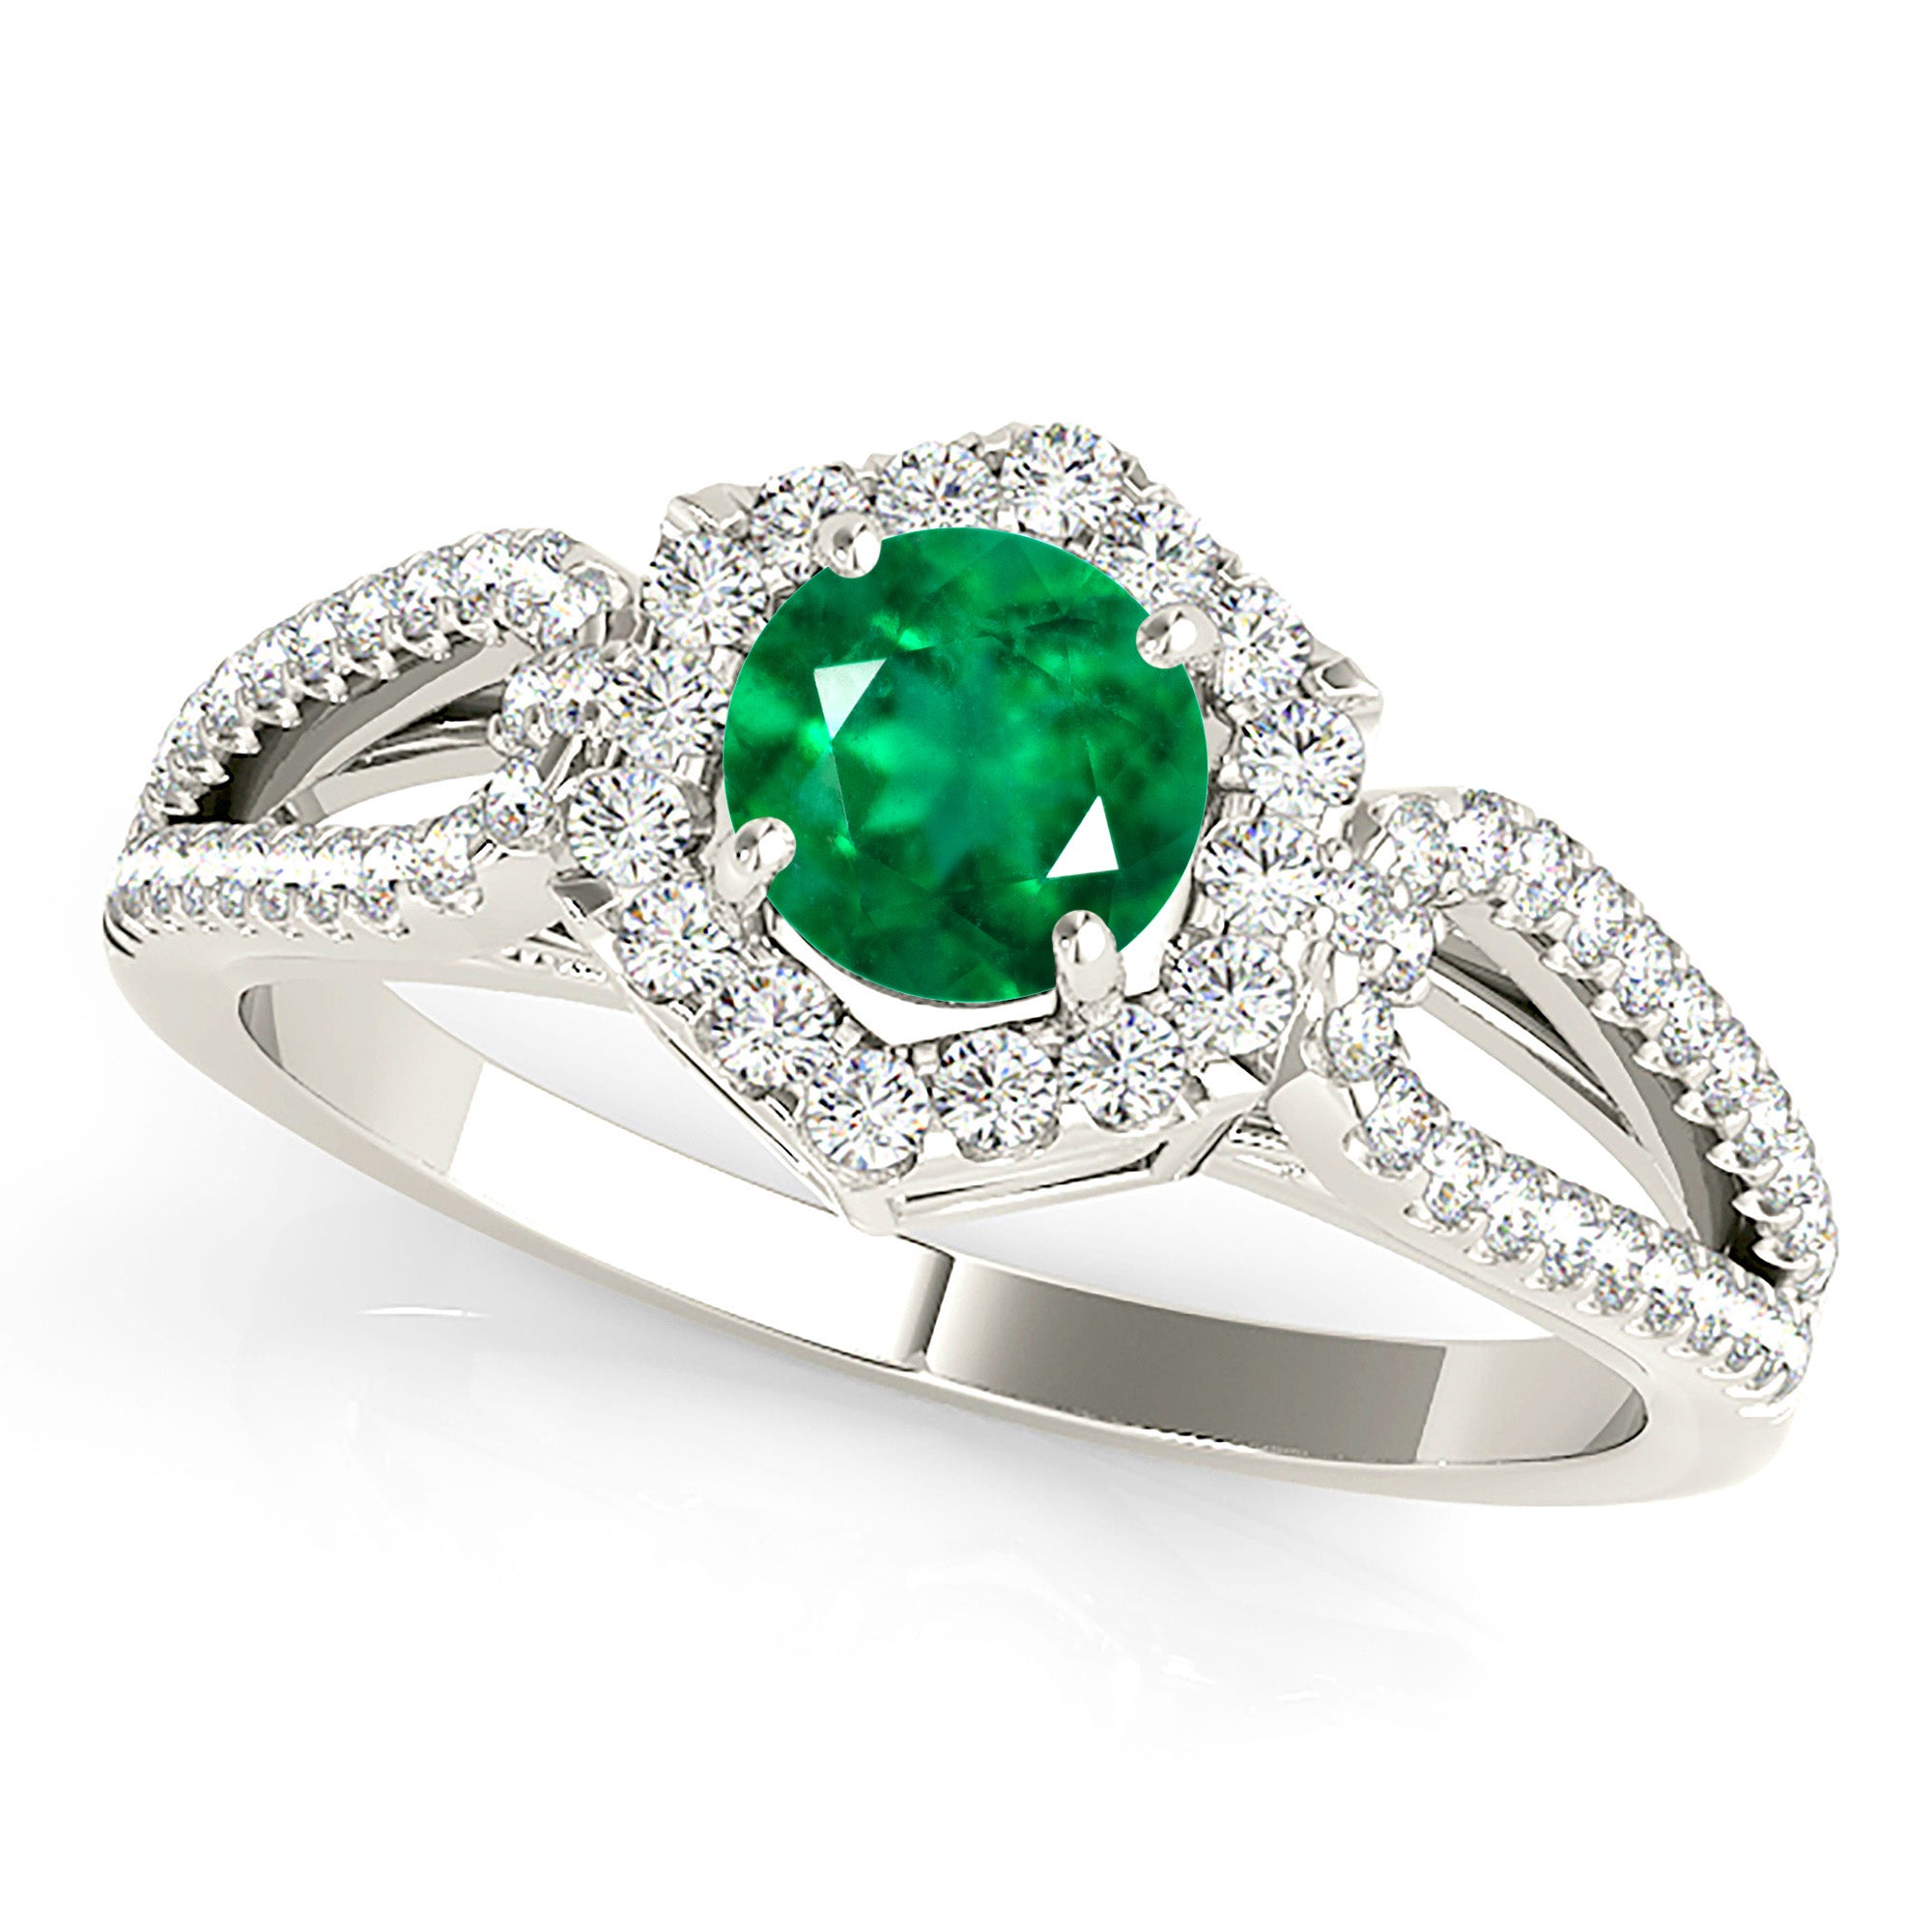 1.14 ct. Genuine Emerald Ring With 0.40 ctw. Diamond Halo And Open Leaf Shape Split Band-in 14K/18K White, Yellow, Rose Gold and Platinum - Christmas Jewelry Gift -VIRABYANI